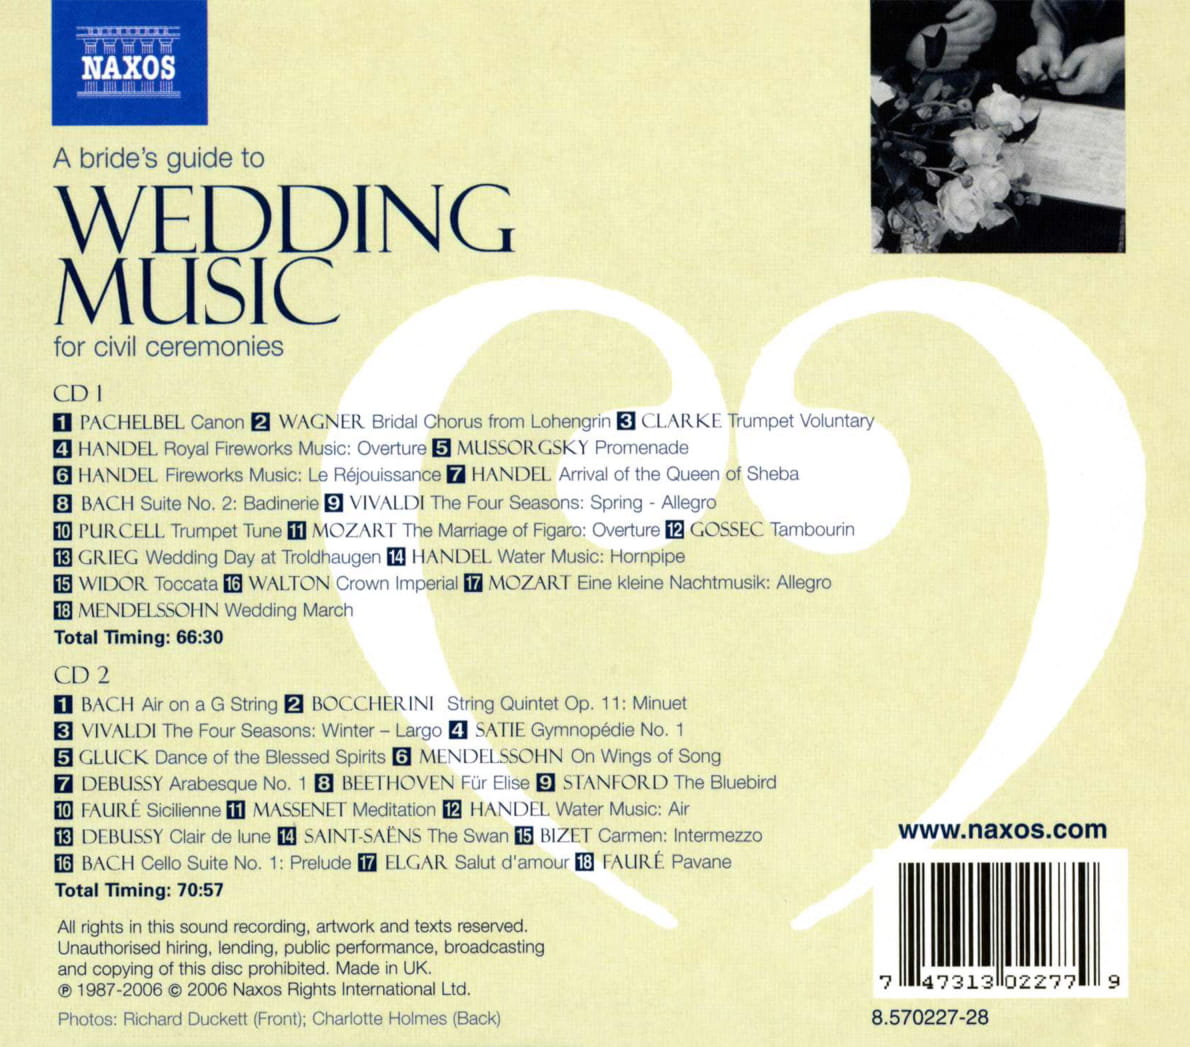 A BRIDE'S GUIDE TO WEDDING MUSIC FOR CIVIL CEREMONIES - slide-1